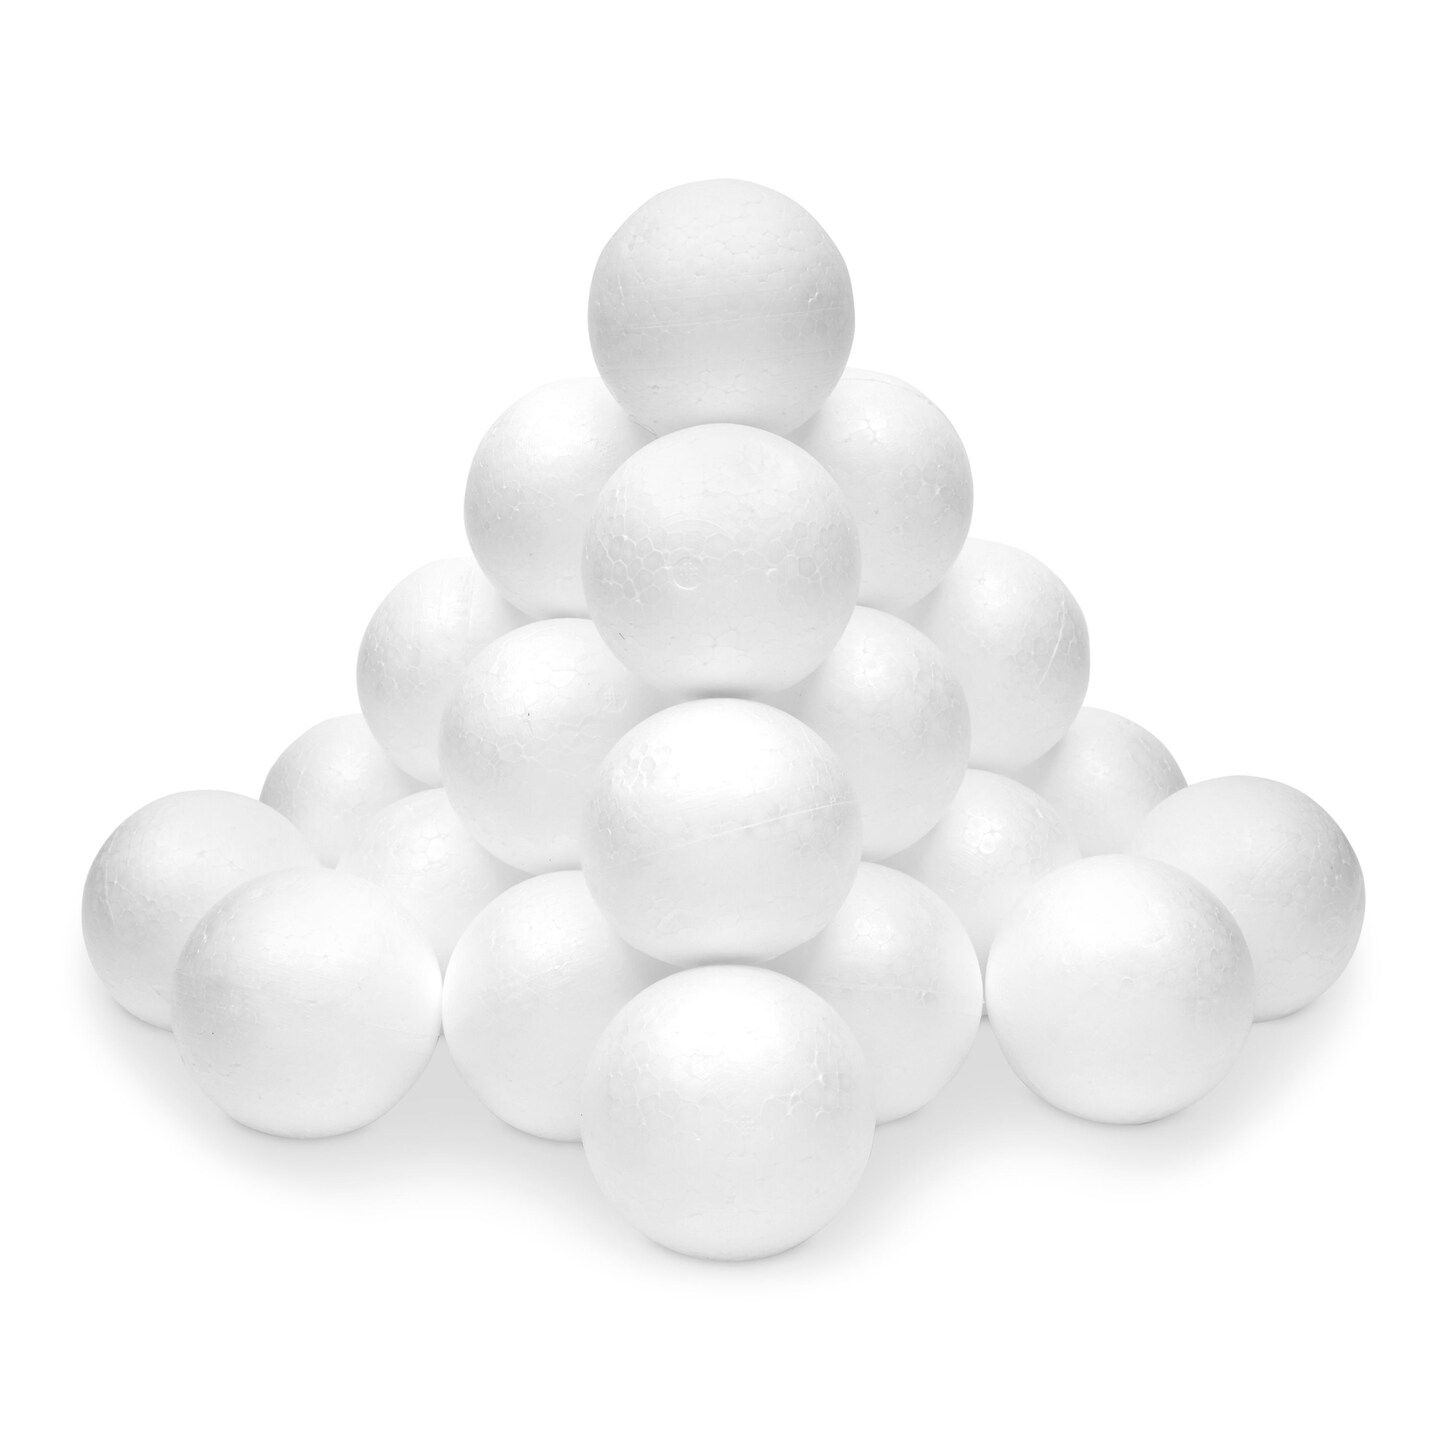  DOITOOL 10PCS Balls 3 Inch- Mini Foam Balls for Crafts- White Foam  Balls Craft Supplies for Art, Craft, Household, School Projects and  Christmas Easter Party Decorations : Arts, Crafts & Sewing